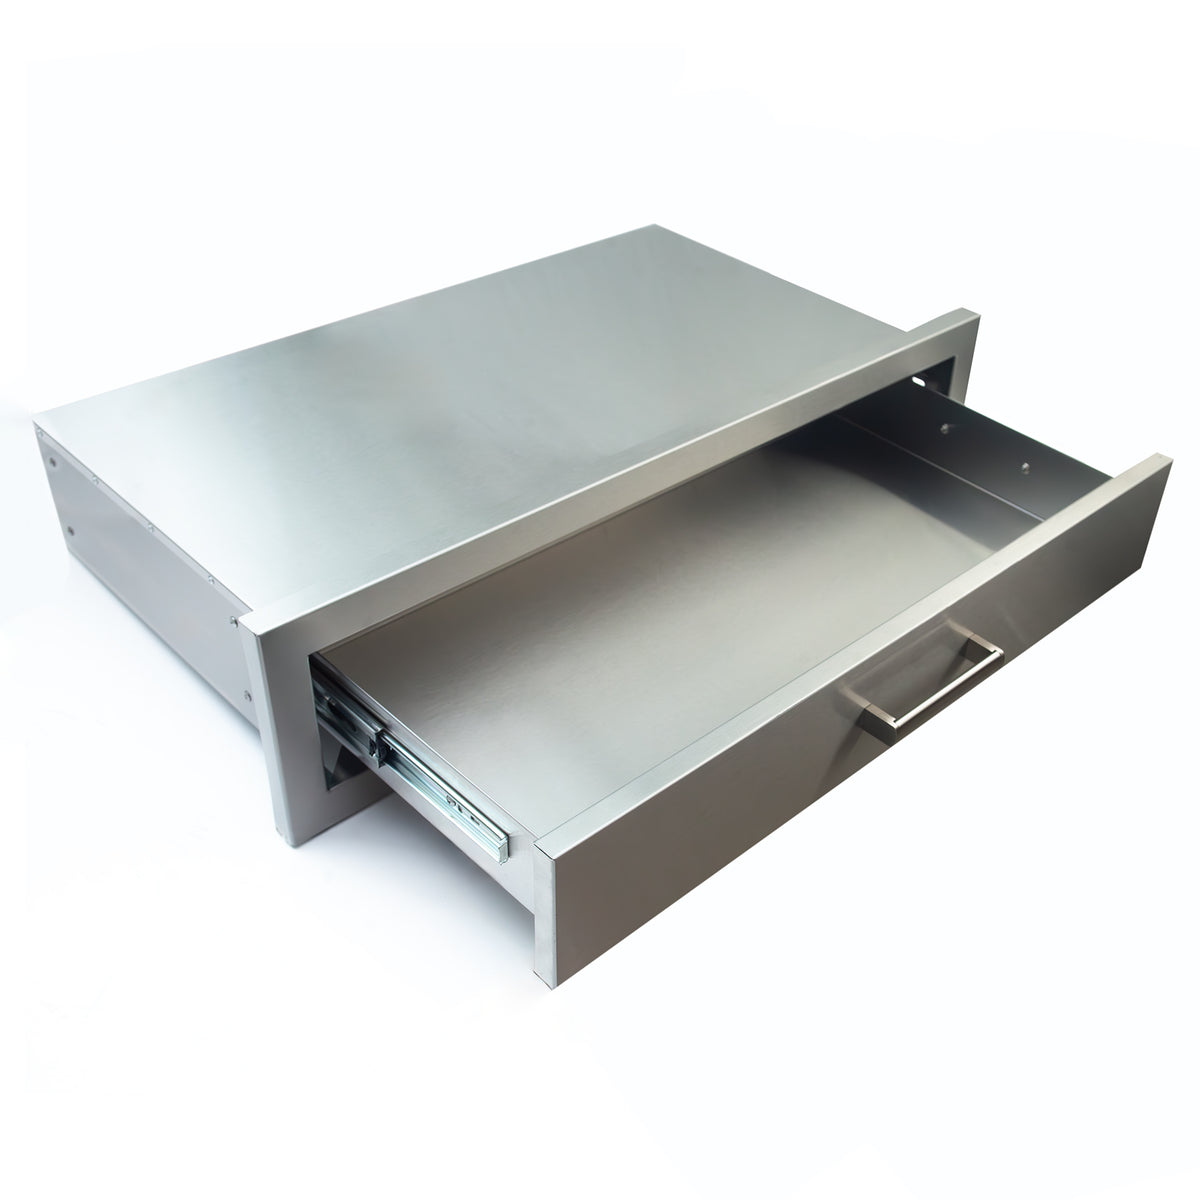 Draco Grills Stainless Steel Build-in Outdoor Kitchen Double Width Drawer